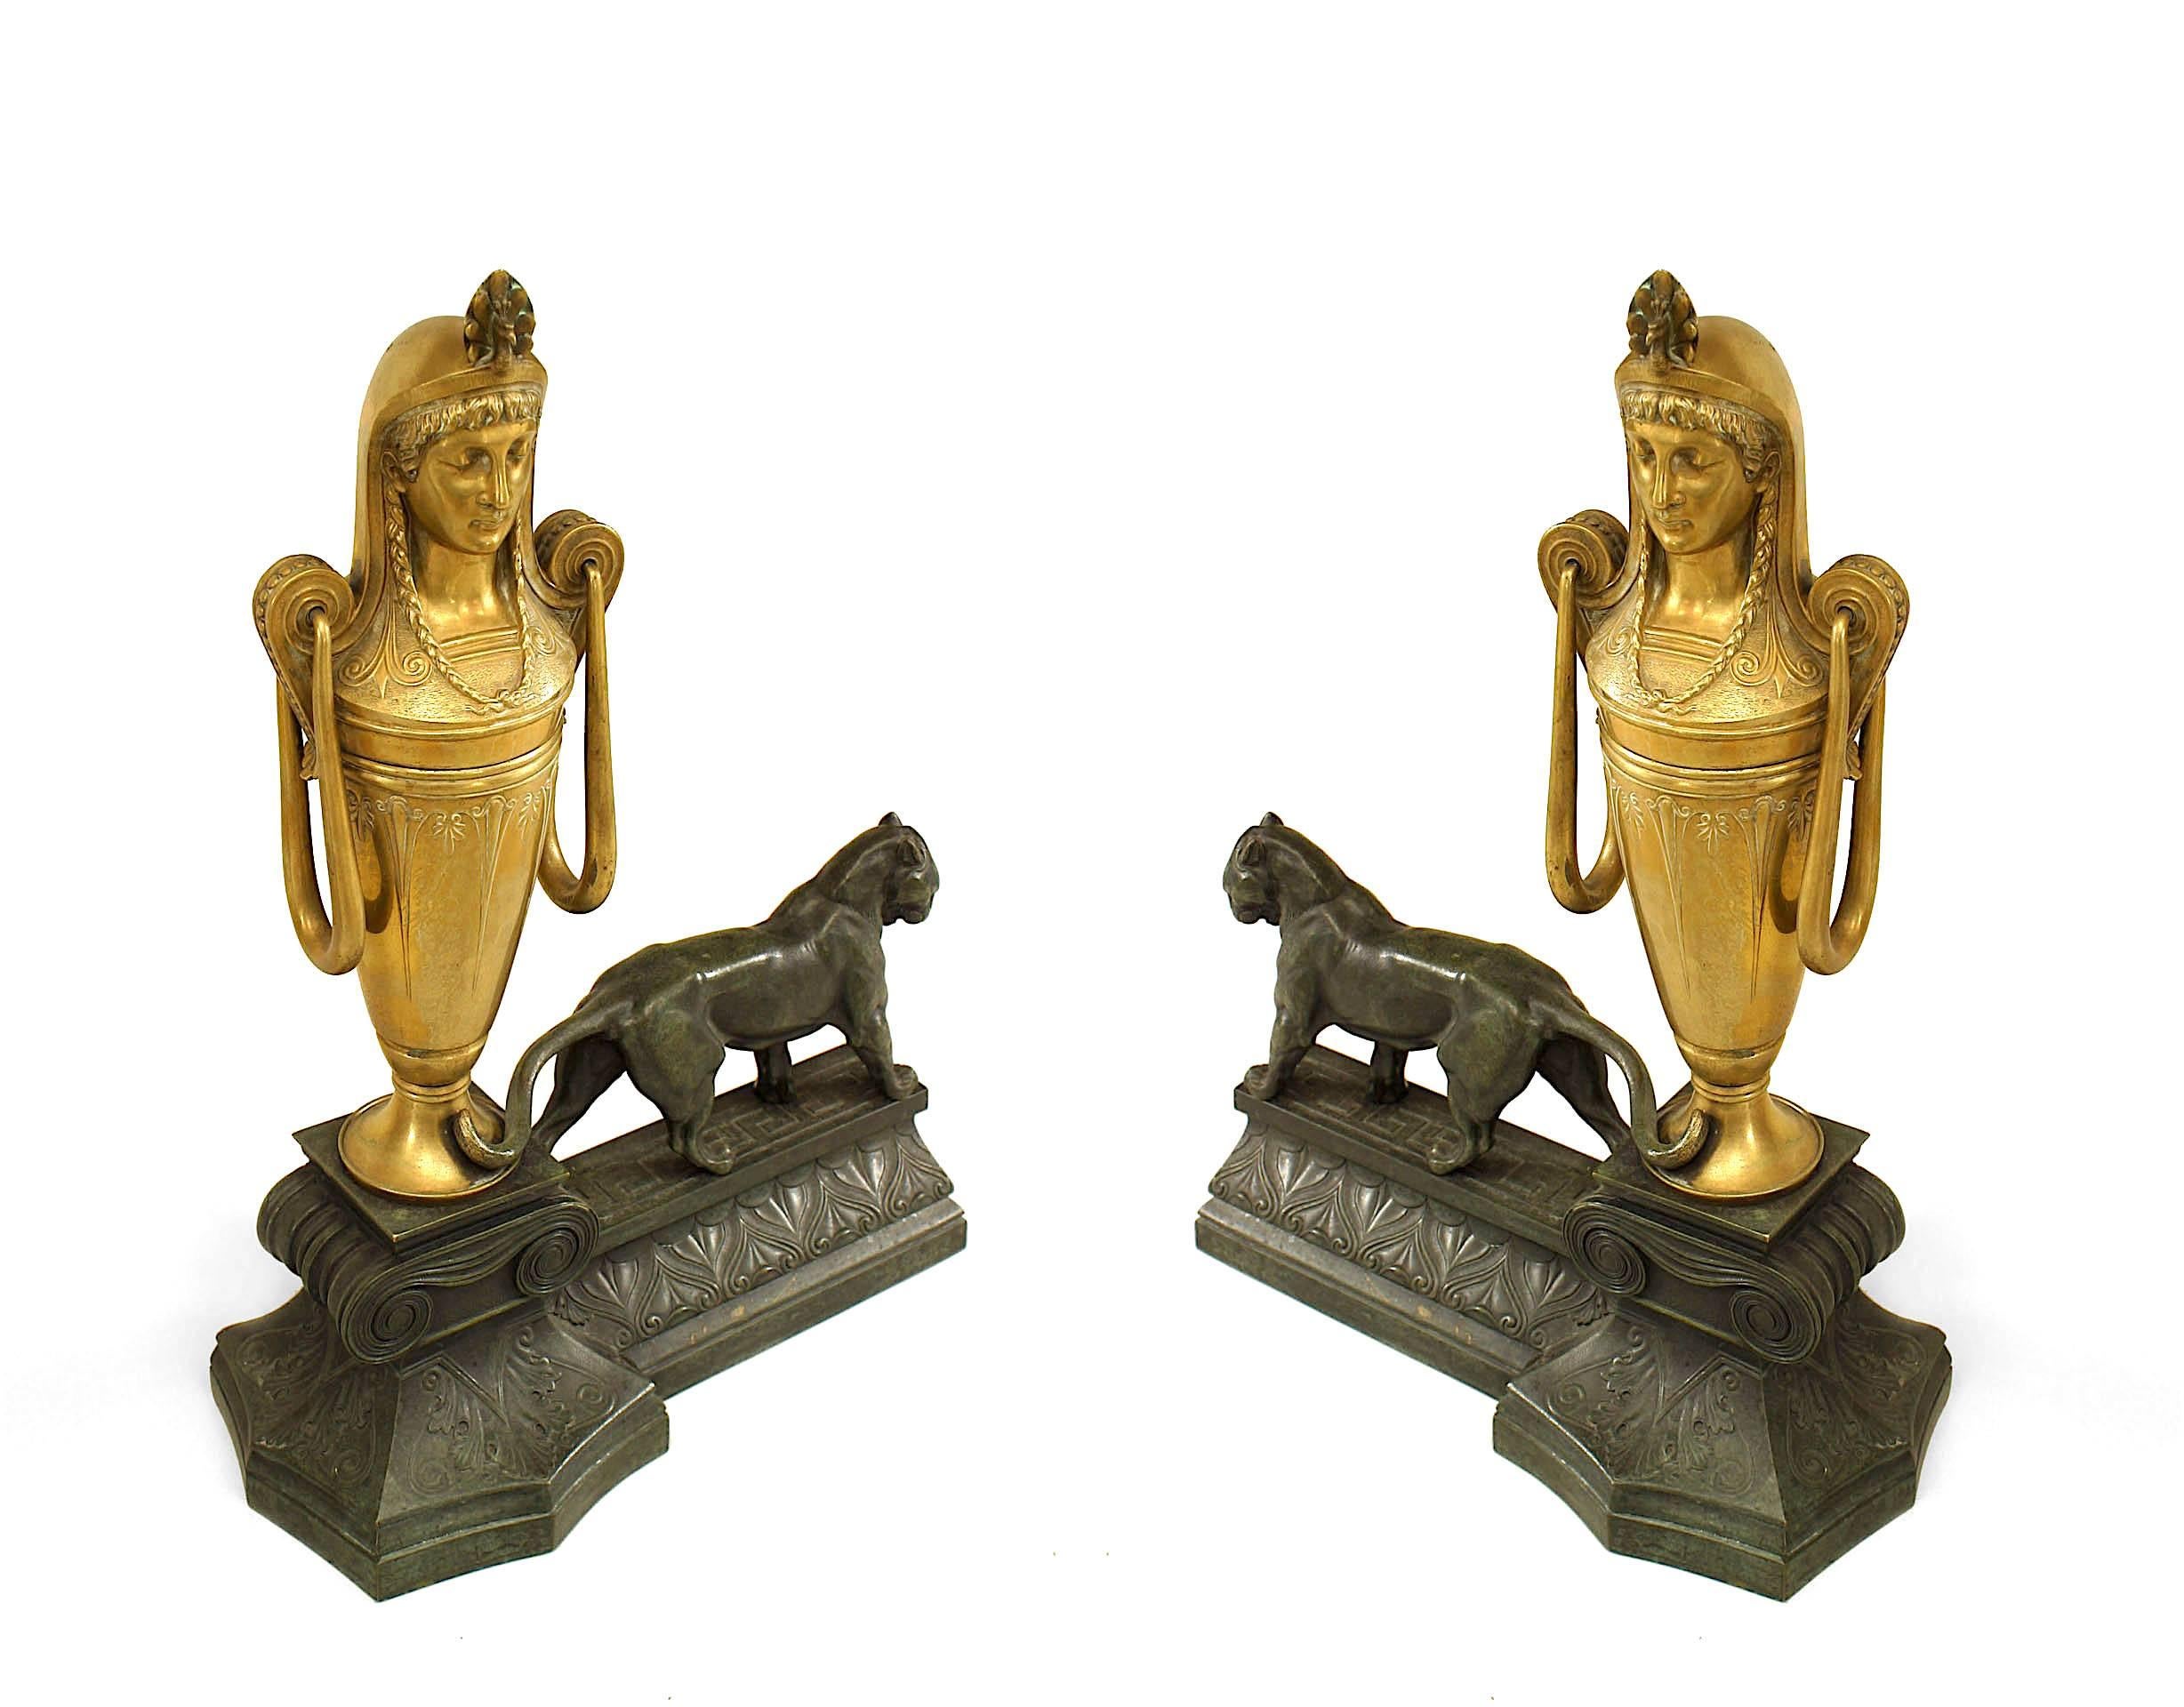 Pair of French Empire-style (Mid-19th Century) bronze andirons with a panther standing next to a gilt urn with a classical Egyptian head (PRICED AS Pair)
